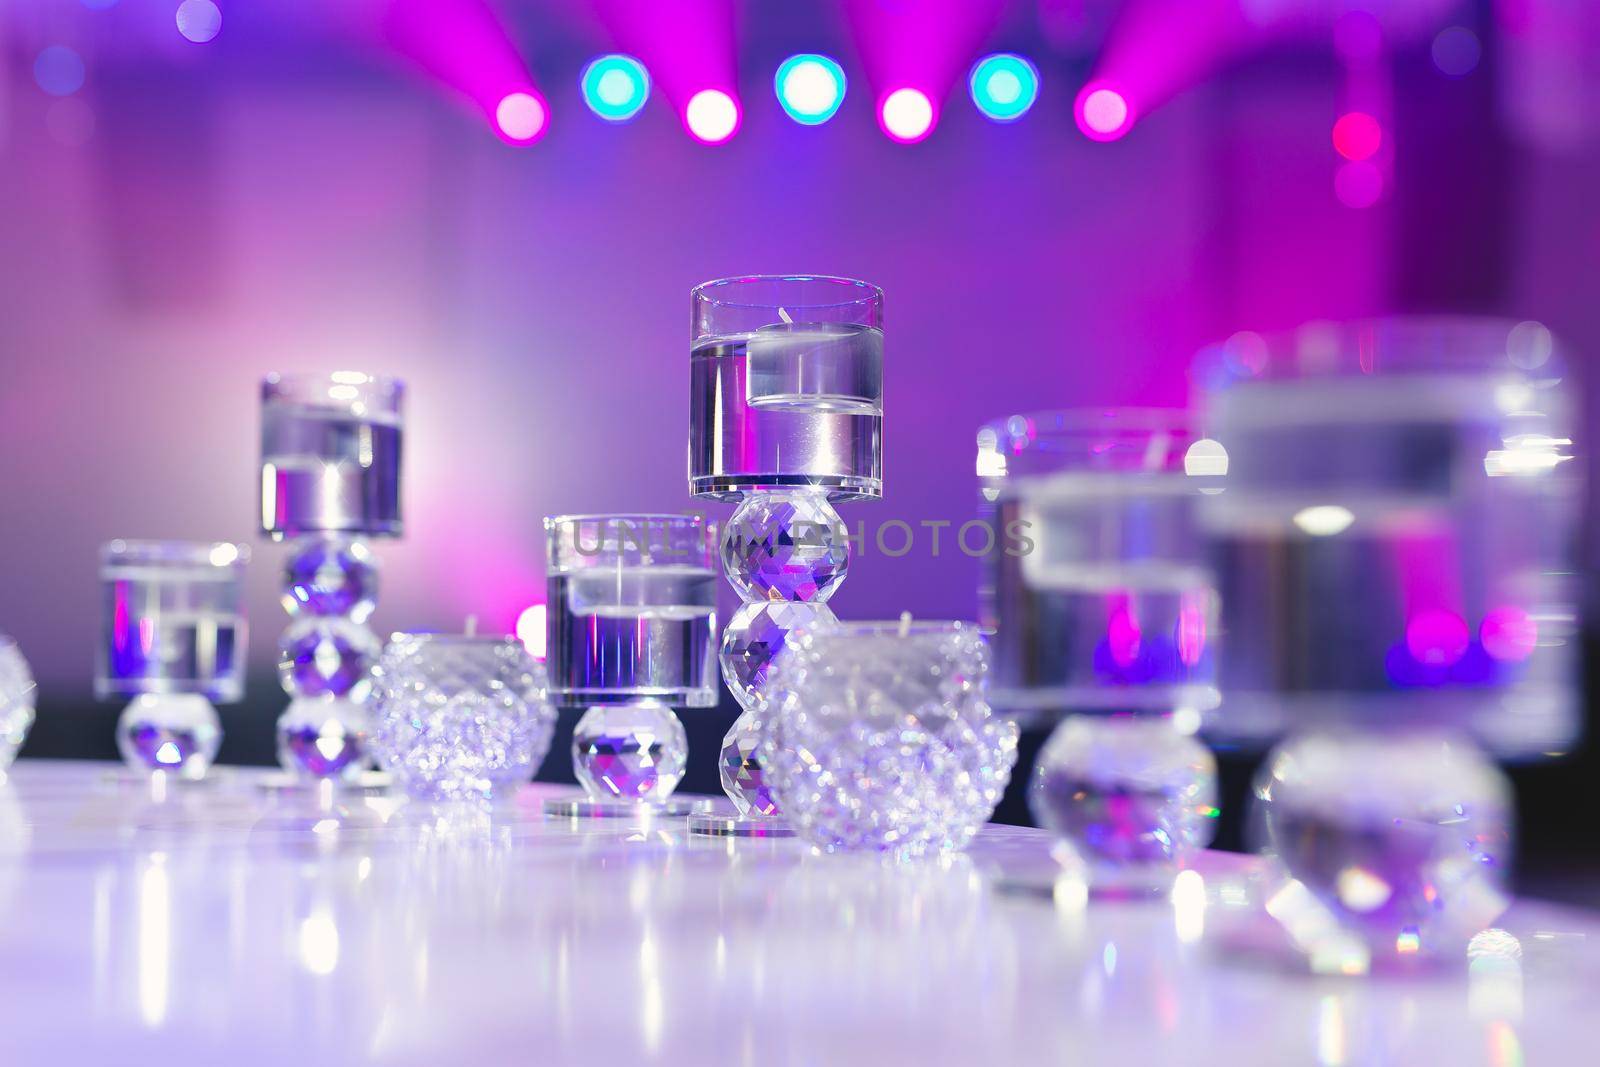 Crystal glasses as part of the wedding banquet table setting by StudioPeace